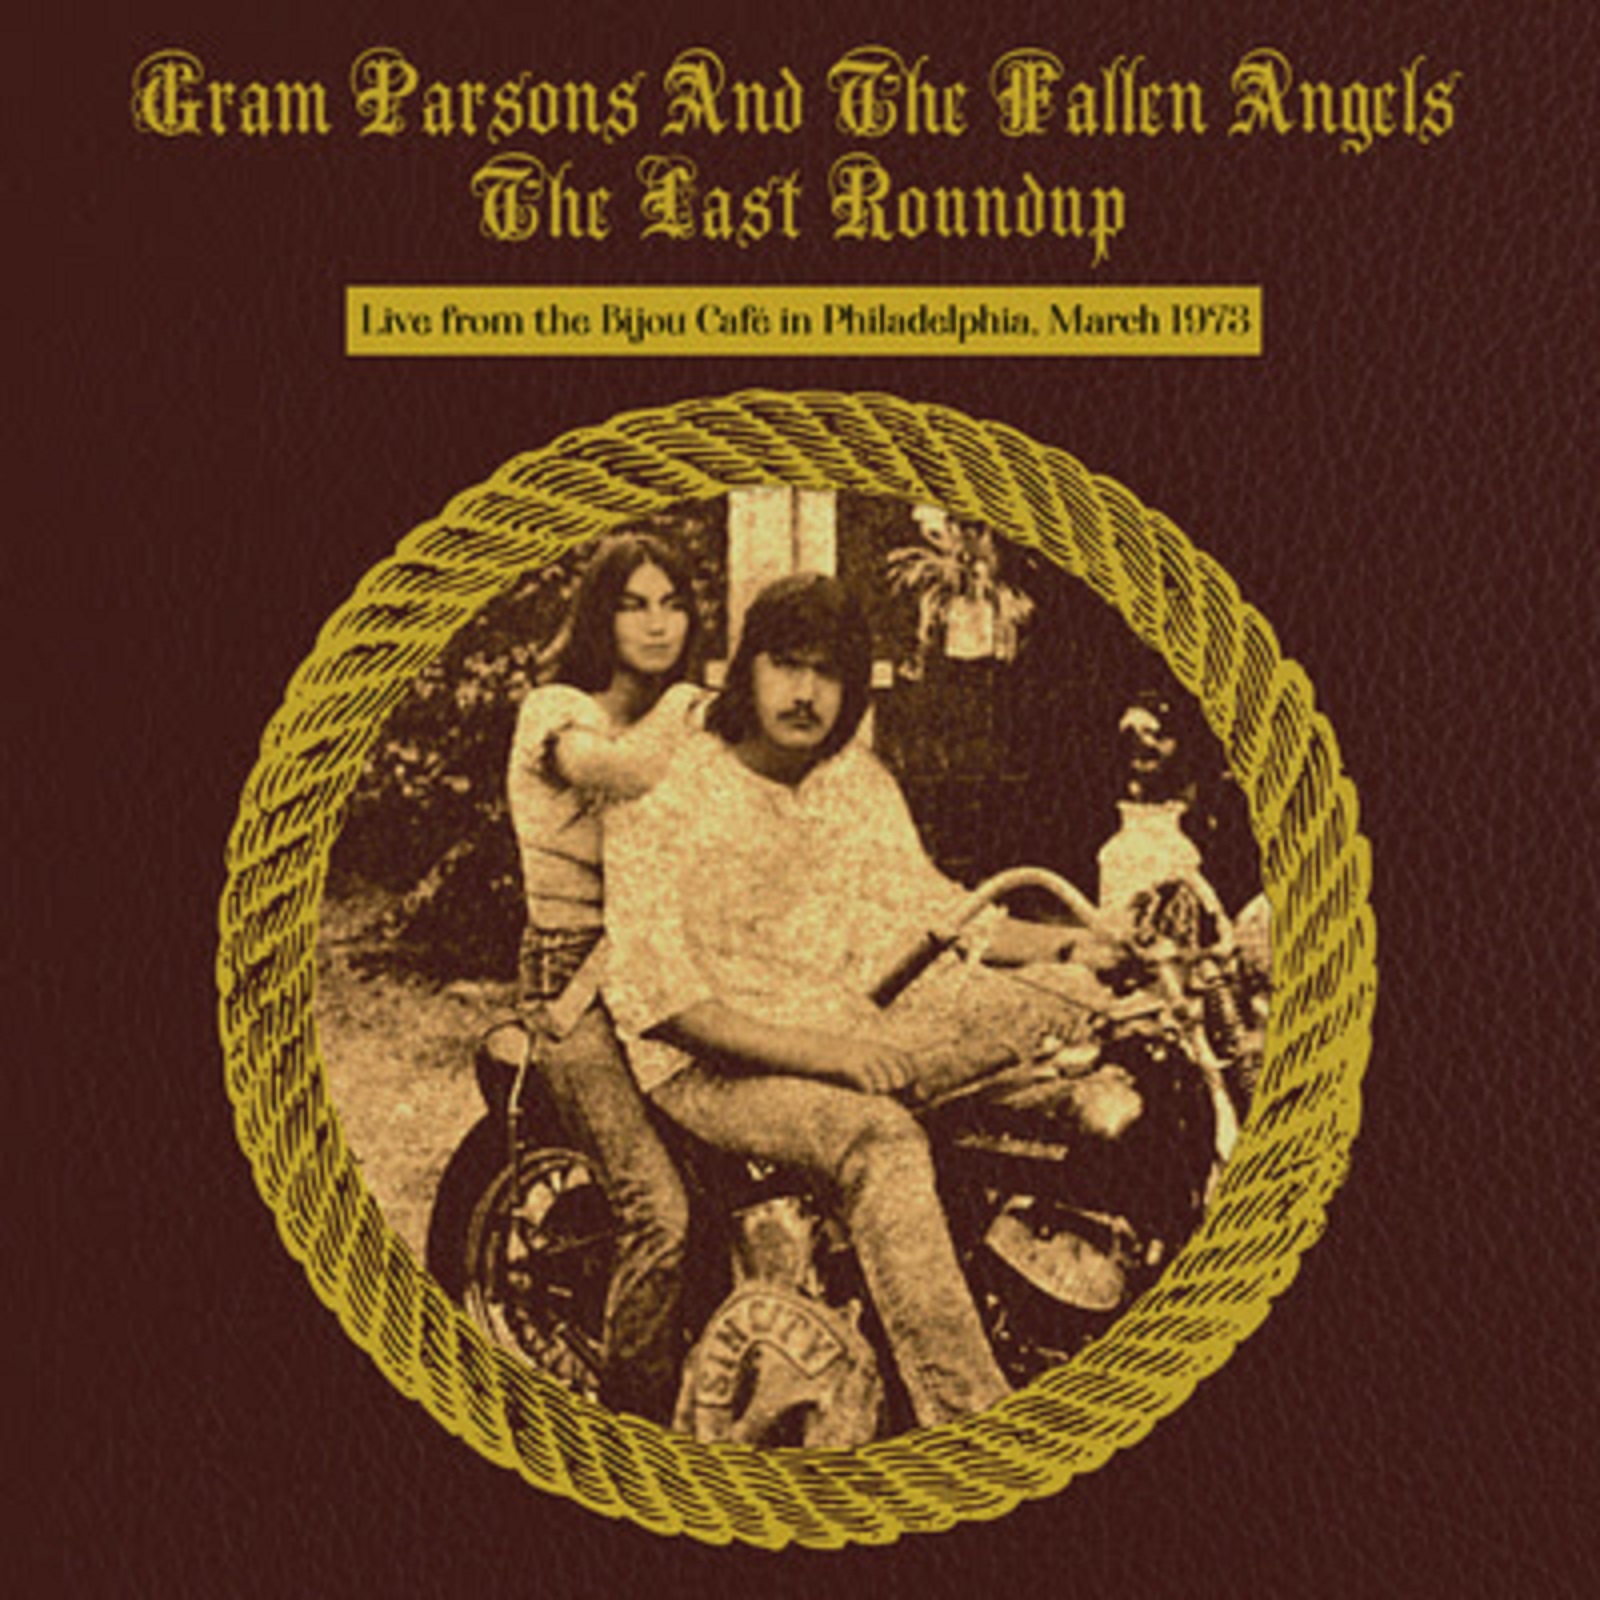 Amoeba Music and Polly Parsons Unveil Rare Gram Parsons and the Fallen Angels Live Recording The Last Roundup: Live from the Bijou Cafe in Philadelphia March 16th, 1973